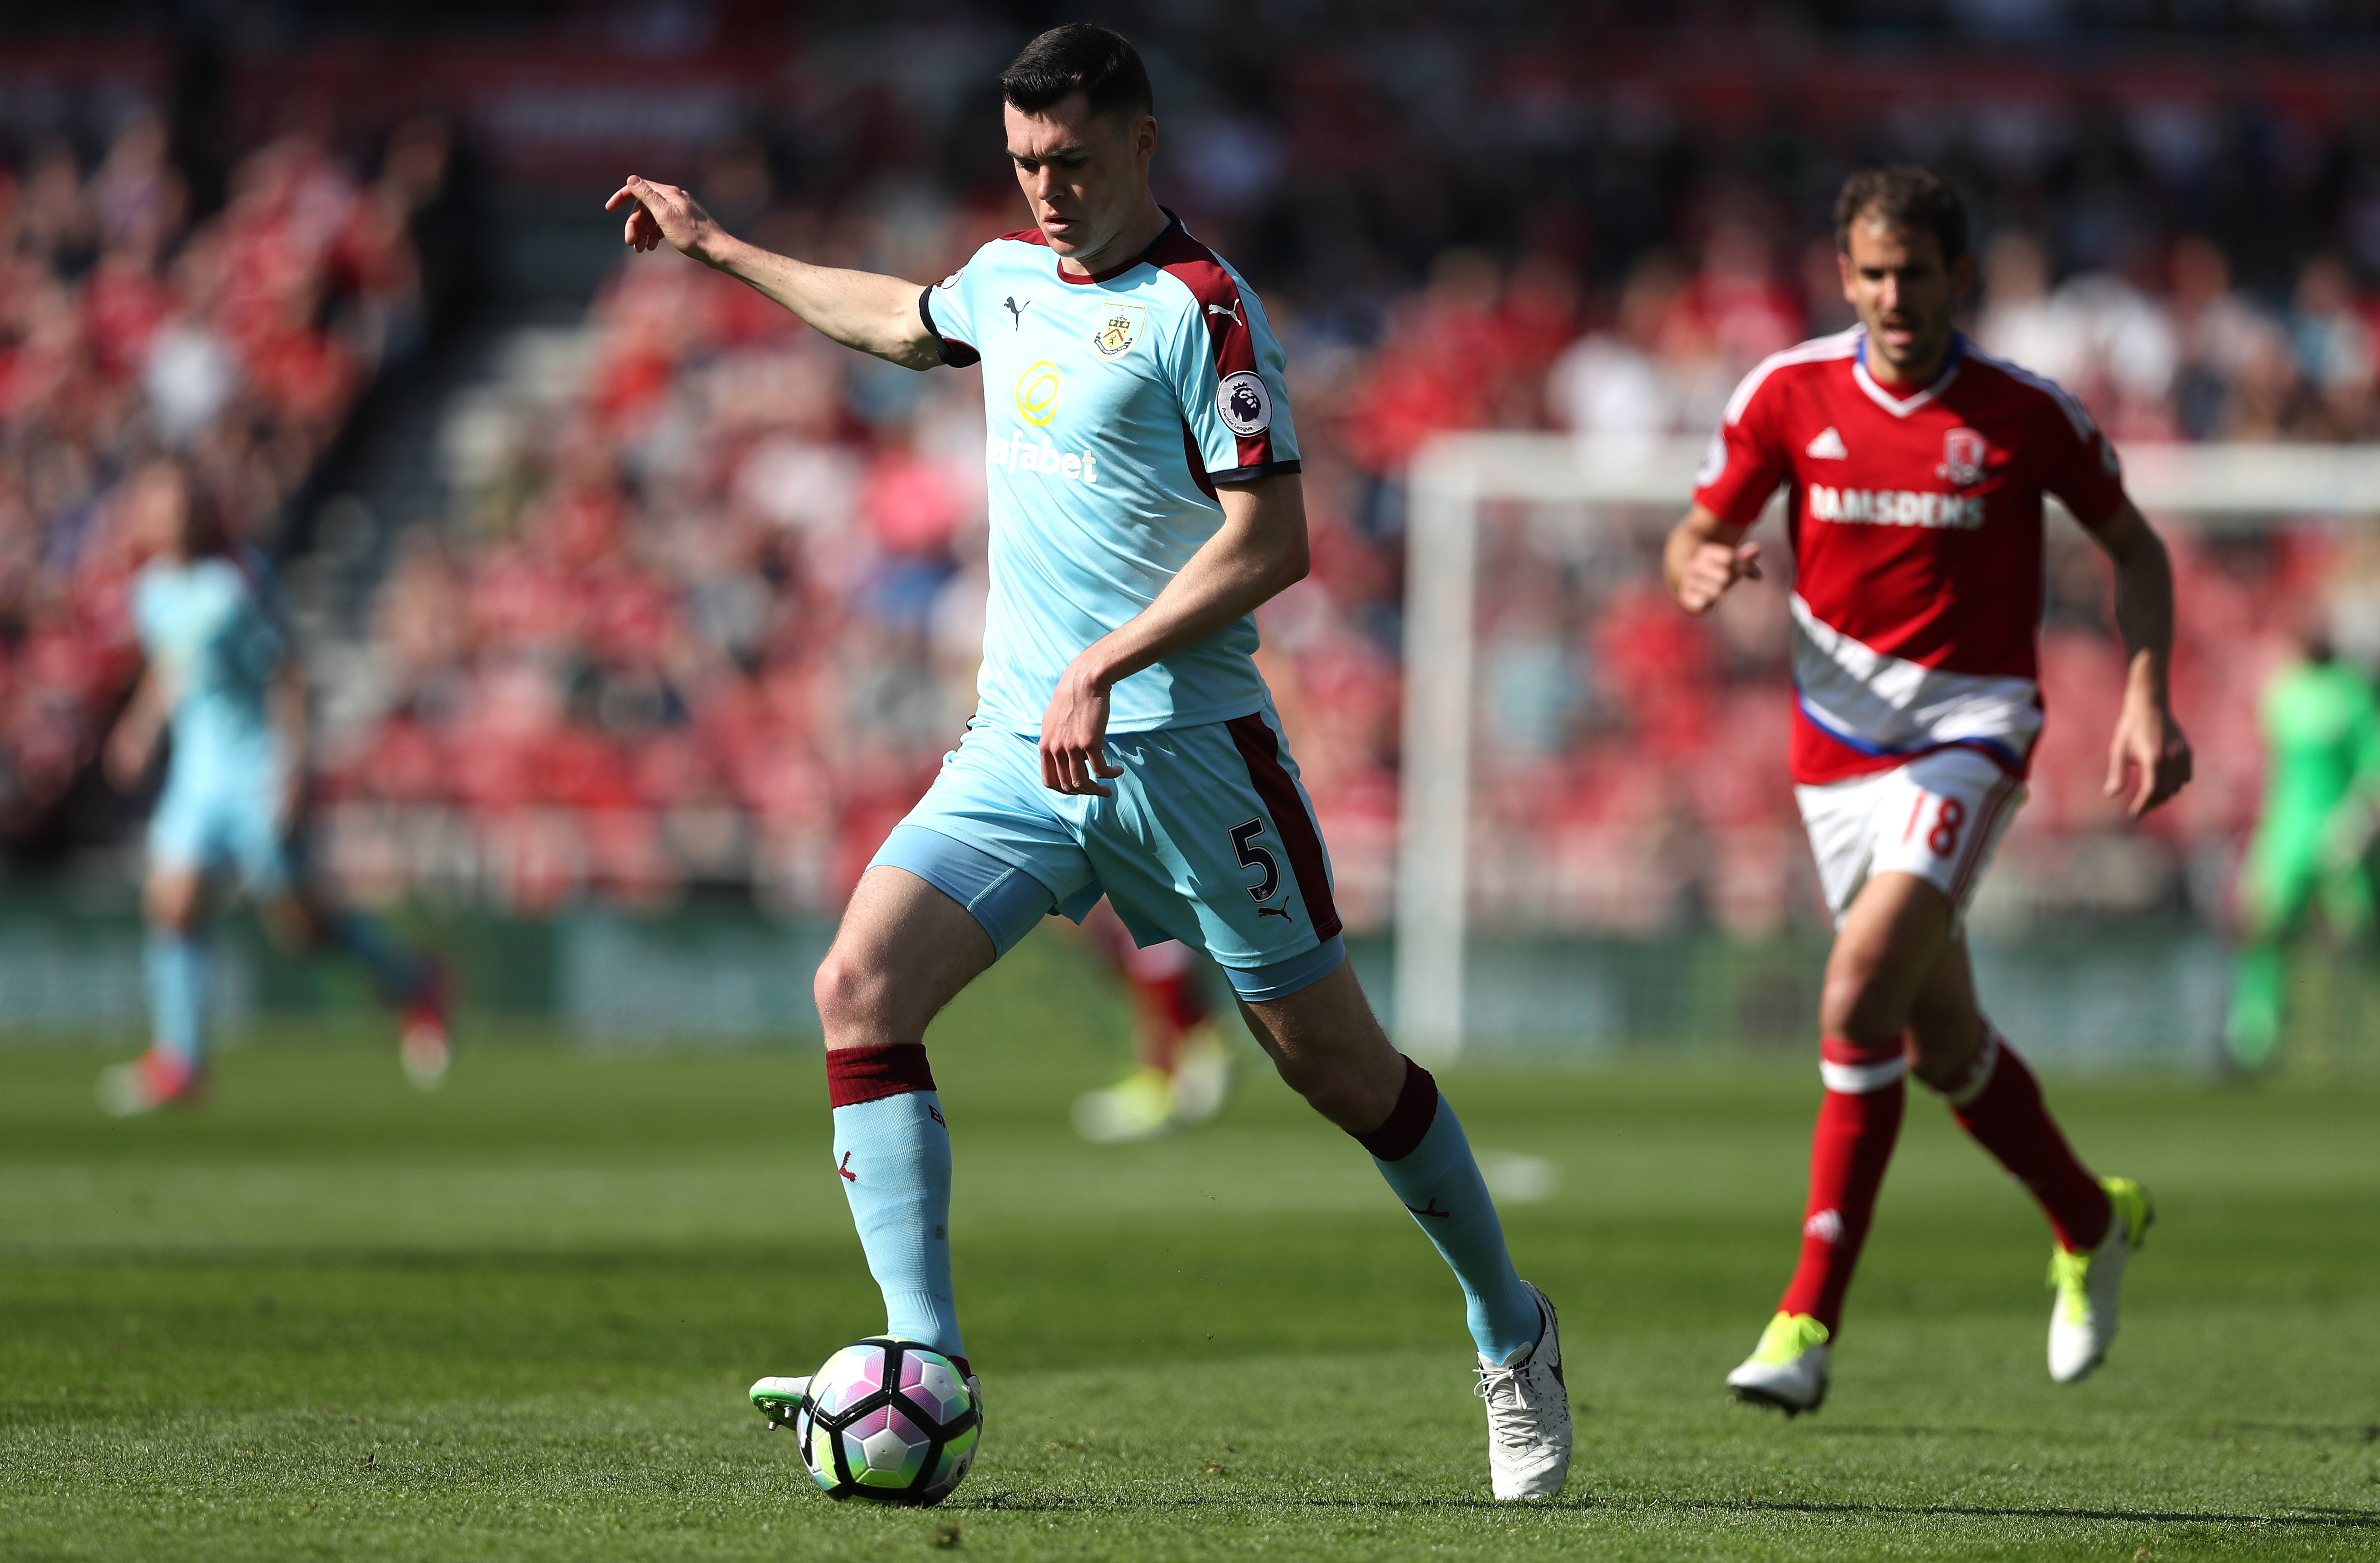 MIDDLESBROUGH, ENGLAND - APRIL 08: Michael Keane of Burnley in action during the Premier League match between Middlesbrough and Burnley at Riverside Stadium on April 8, 2017 in Middlesbrough, England.  (Photo by Ian MacNicol/Getty Images)